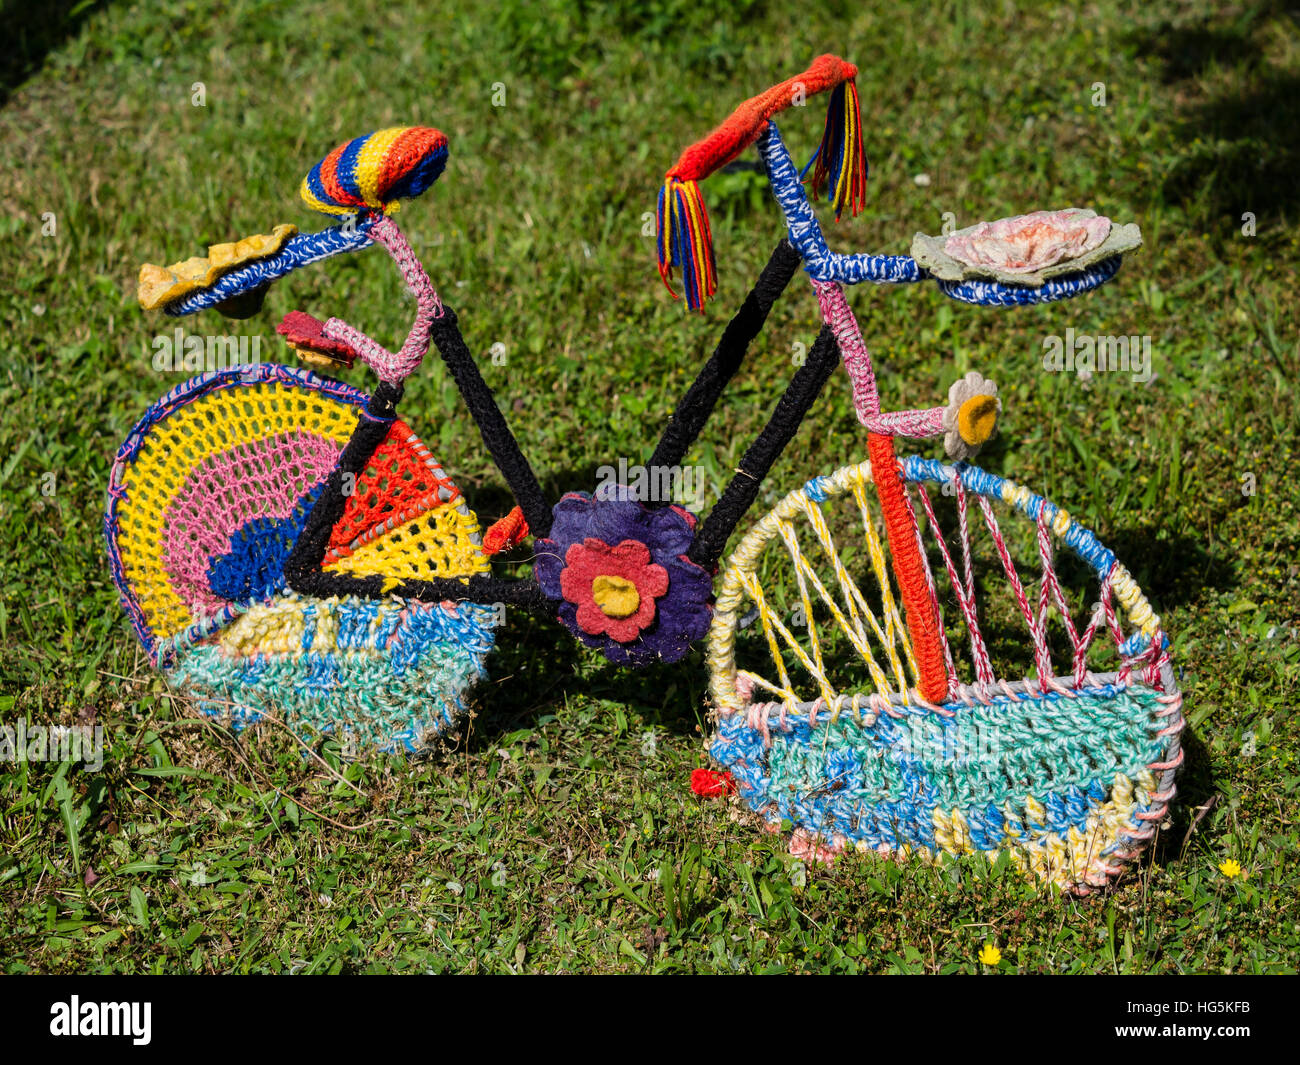 Bicycle, covered with colored knitted wool, seen in Eifel area near Daun, Germany Stock Photo